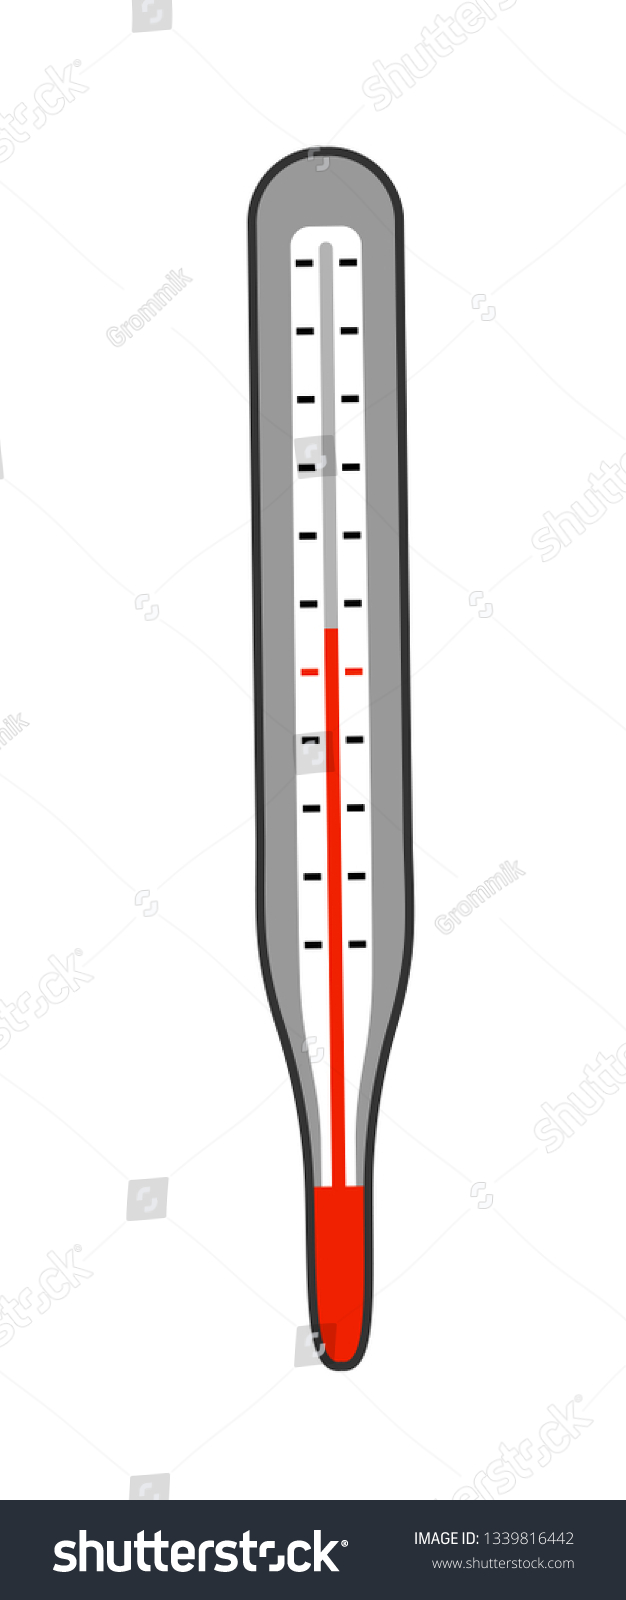 Thermometer Measuring Human Body Temperature Flat Stock